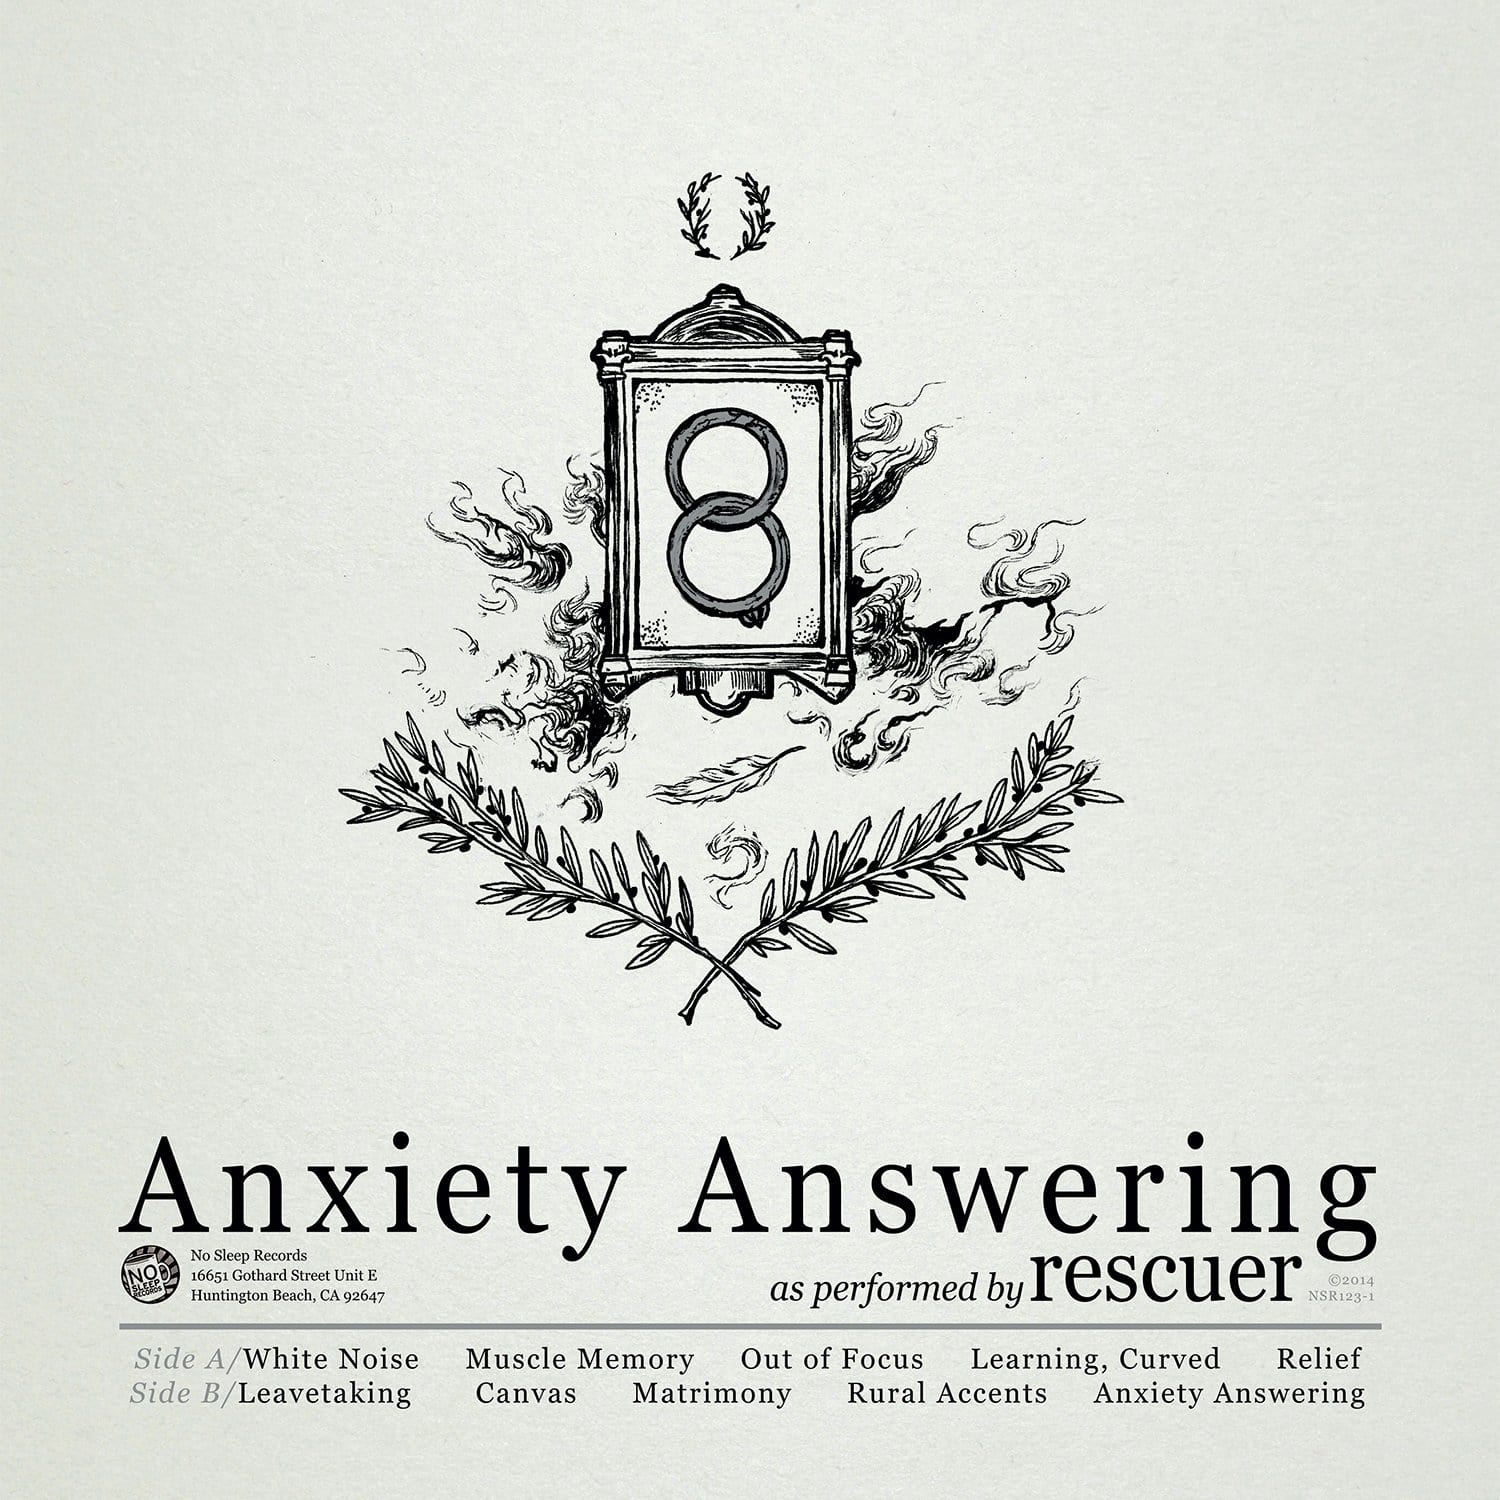 Anxiety Answering - NO SLEEP RECORDS - Rescuer